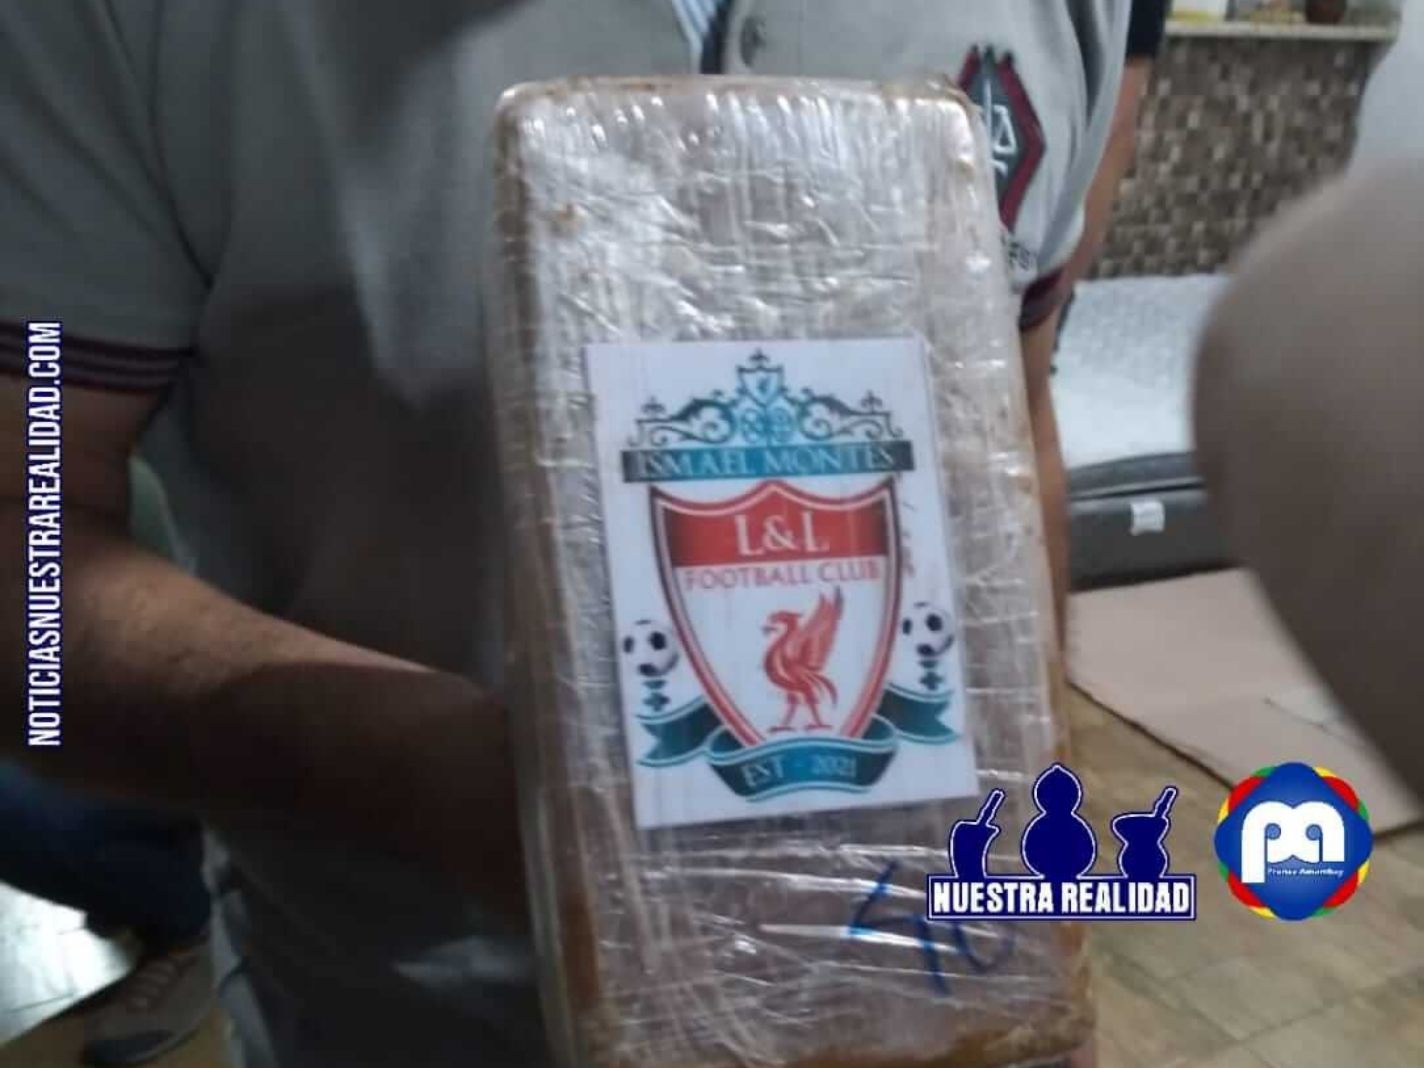 Police in Paraguay seize 200 kilos of Liverpool branded cocaine